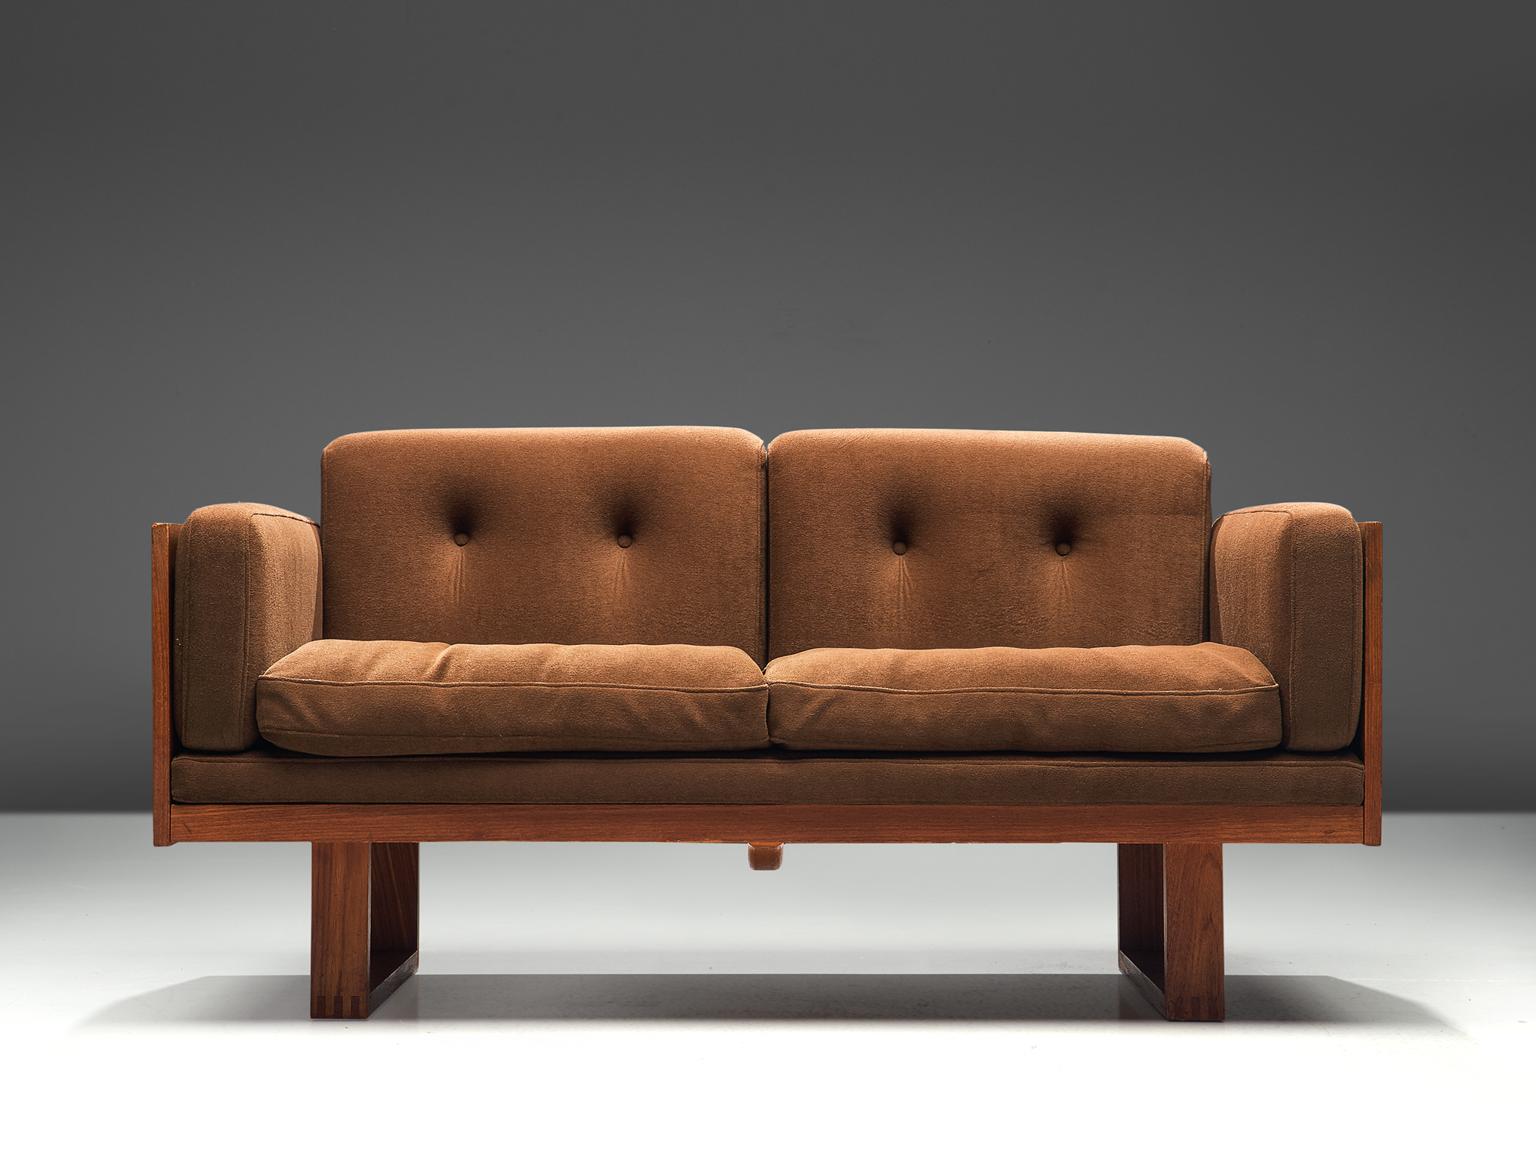 Poul Cadovious for France & Søn, sofa in teak and fabric, Denmark, 1960s. 

Beautiful basket settee by Danish designer Poul Cadovious. The frame consists of teak and is finished with woven cloth straps. Two sled-legs provide an open look to the